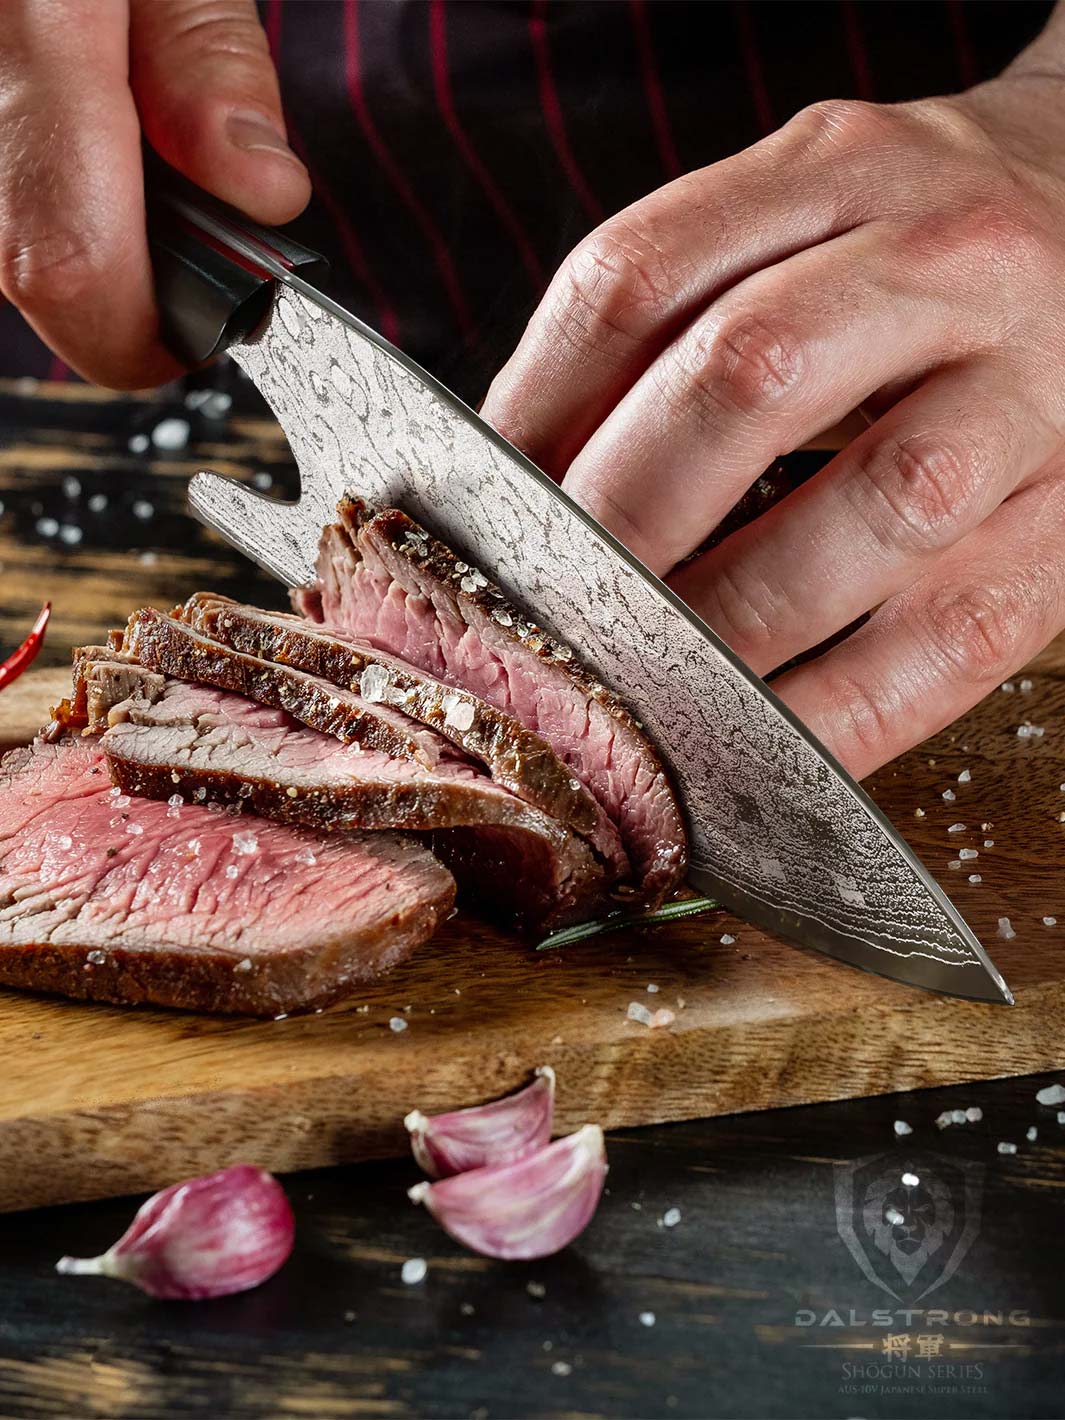 Dalstrong shogun series 8 inch guardian chef knife slicing through a steak on a wooden board.